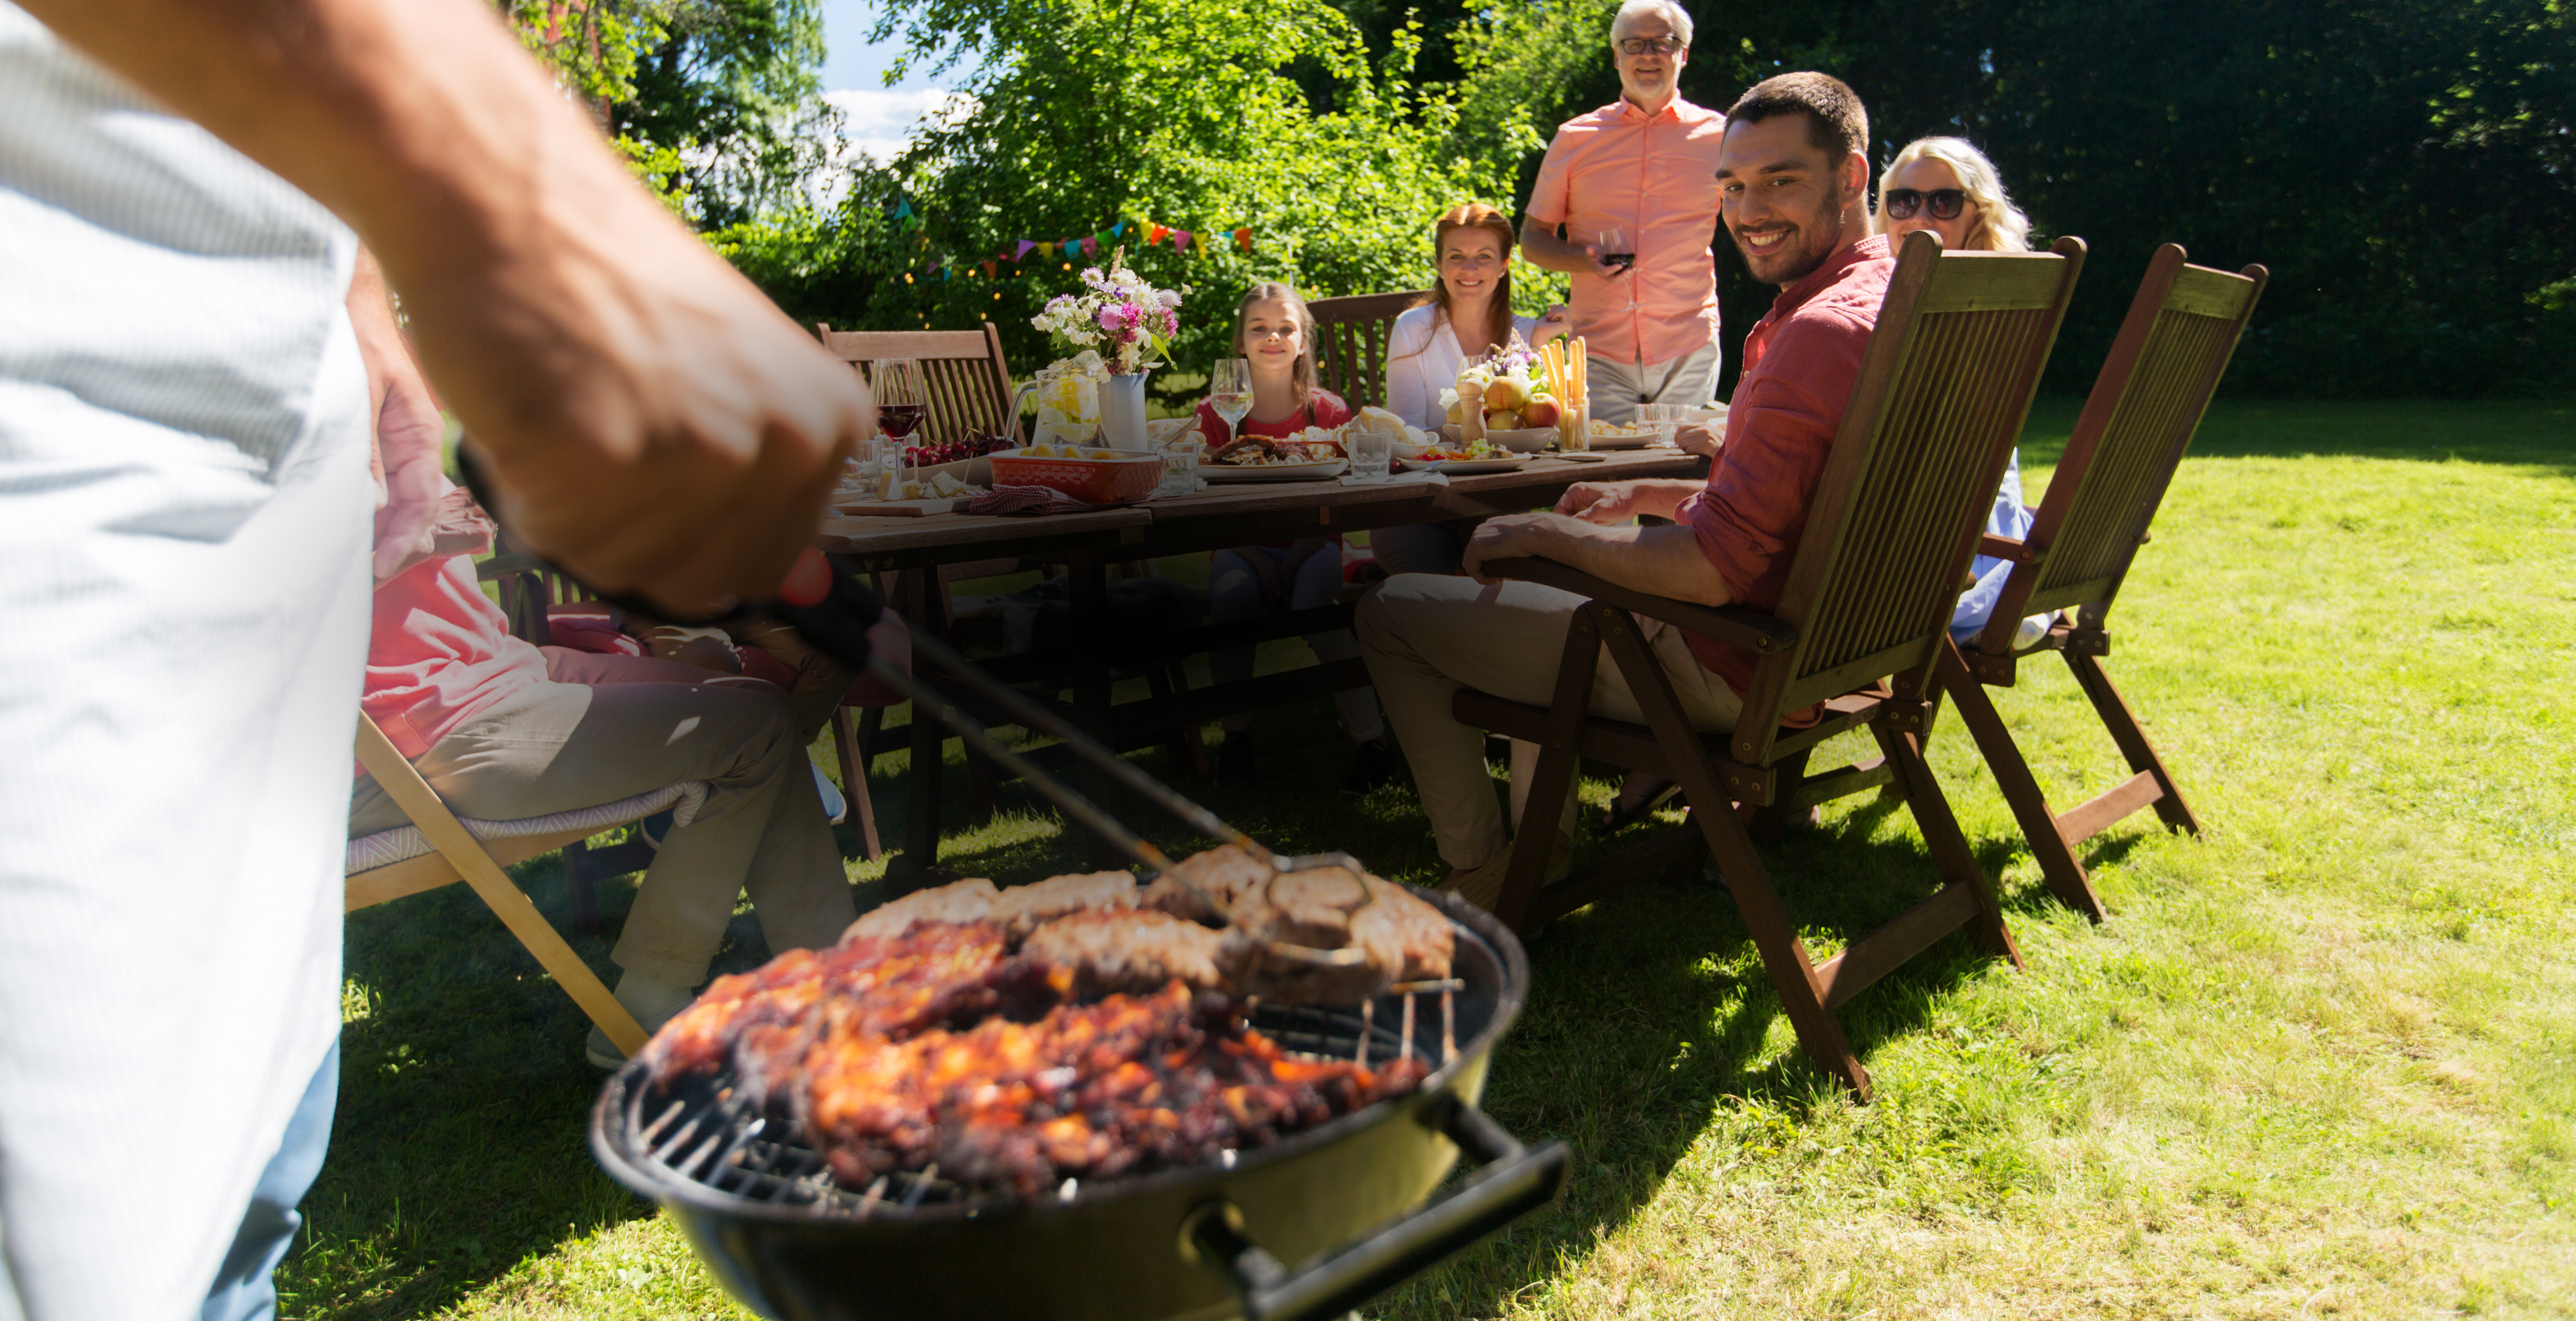 Top tips for hosting a summer barbecue at home